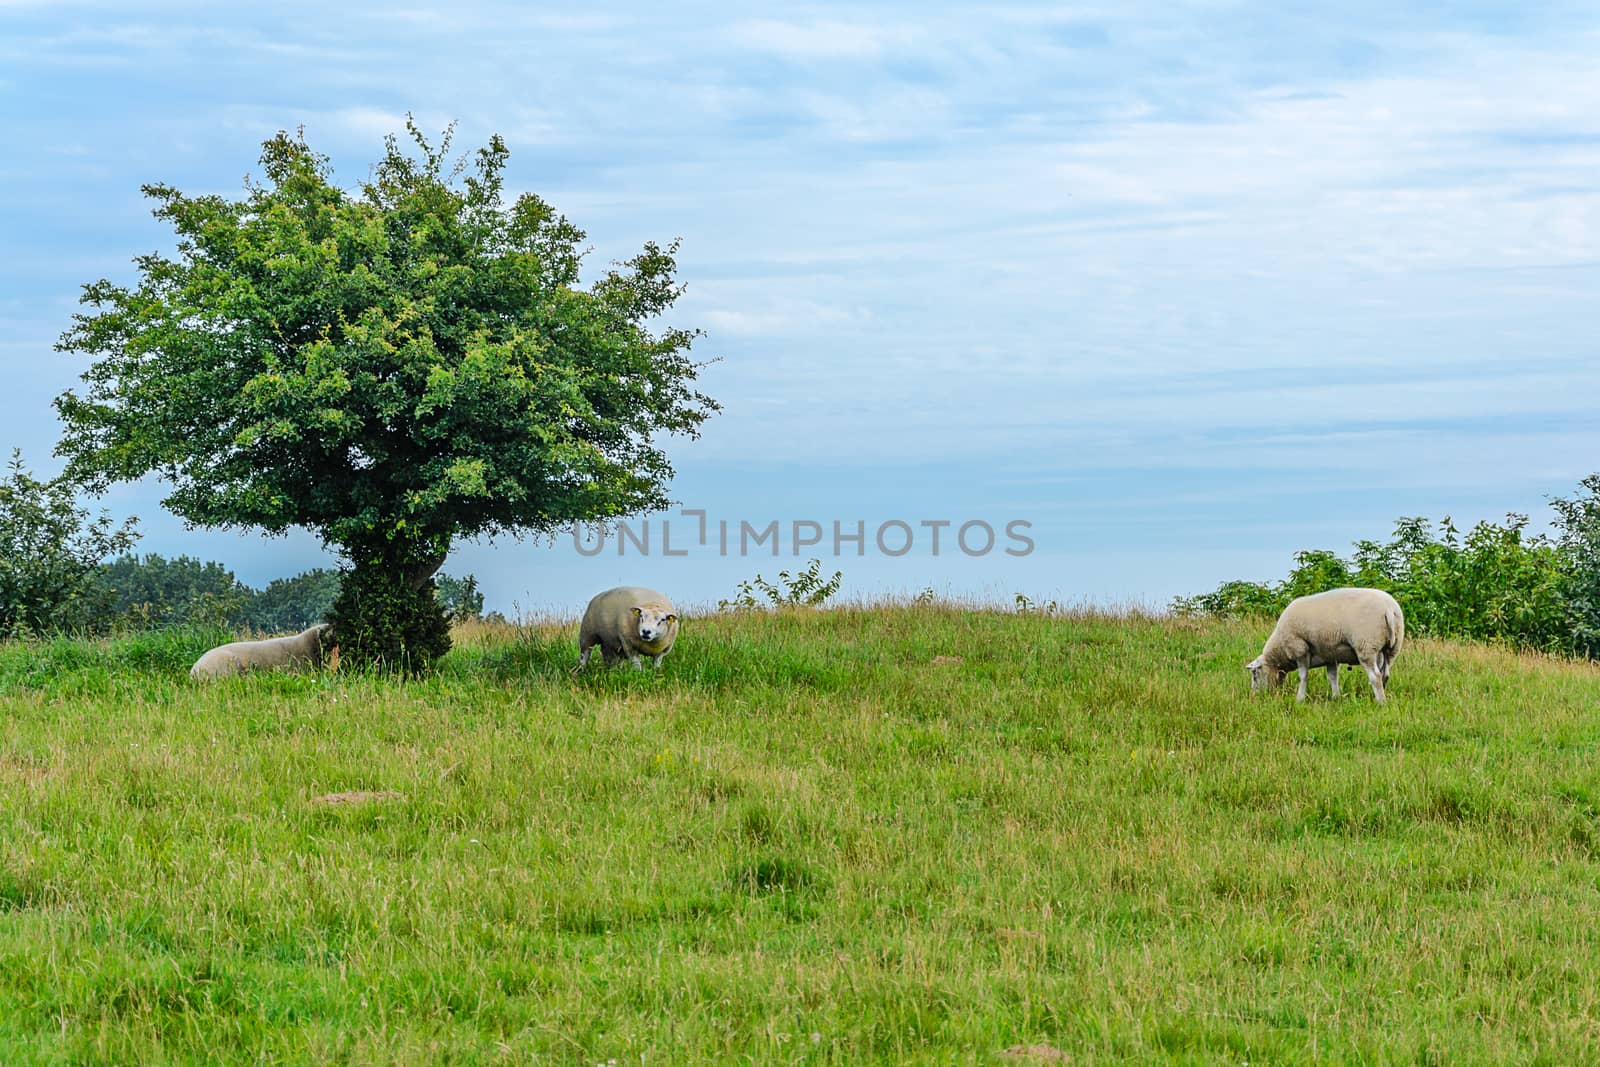 Idyllic landscape of sheep grazing on a green pasture on the background of clouds and blue sky.